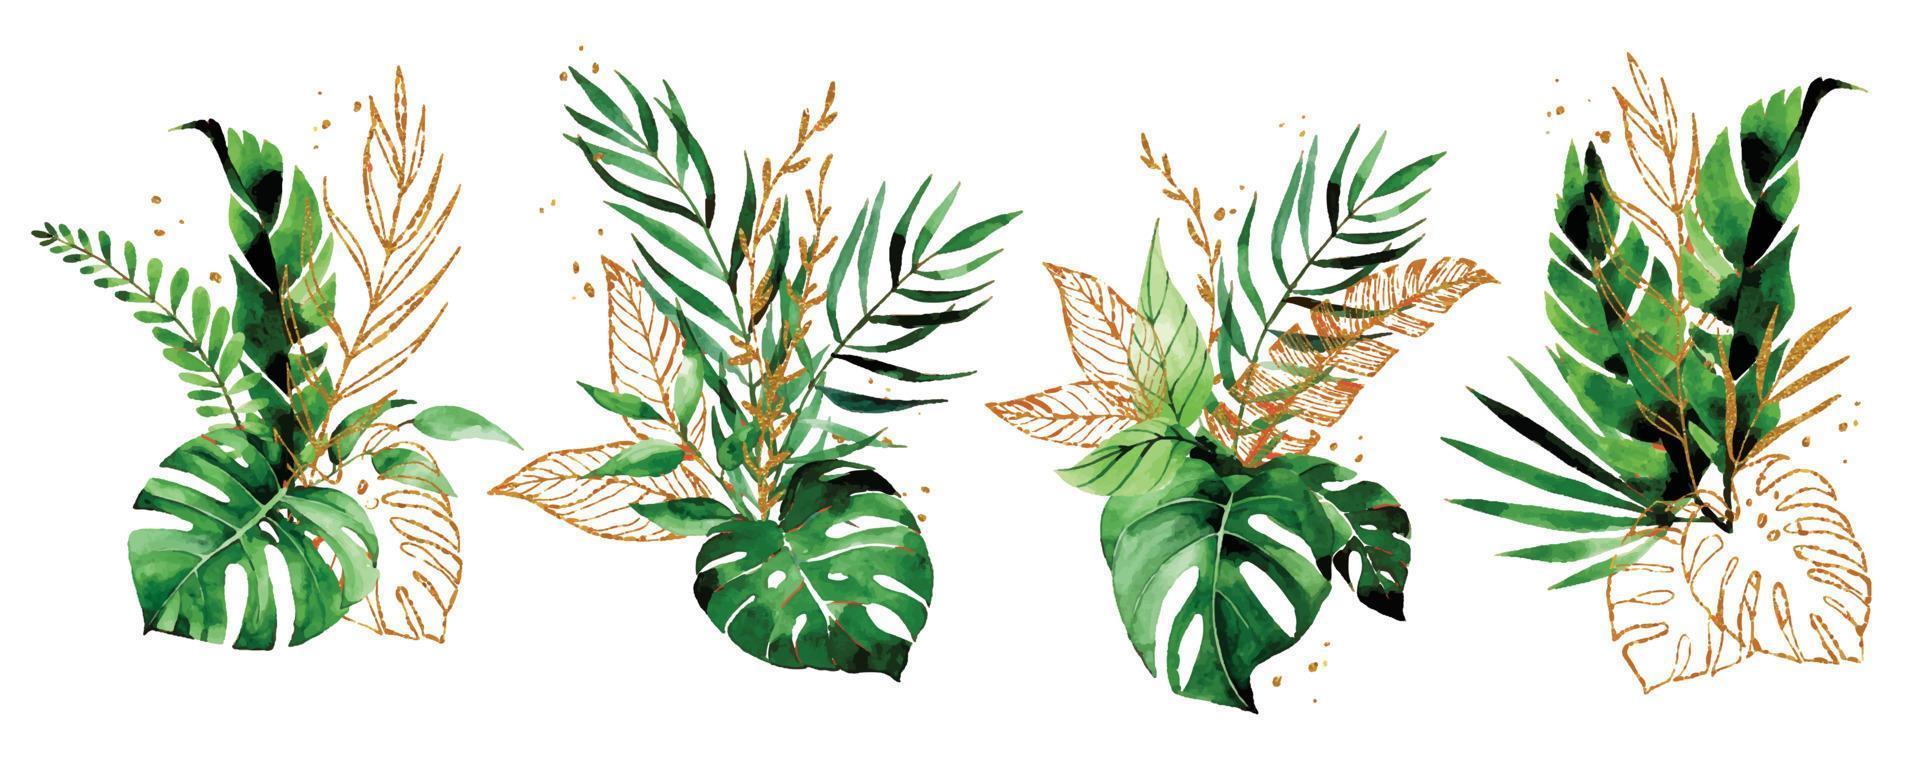 watercolor drawing. set of bouquets, compositions of tropical leaves and golden elements. green and gold leaves of palm, monstera. vintage style vector